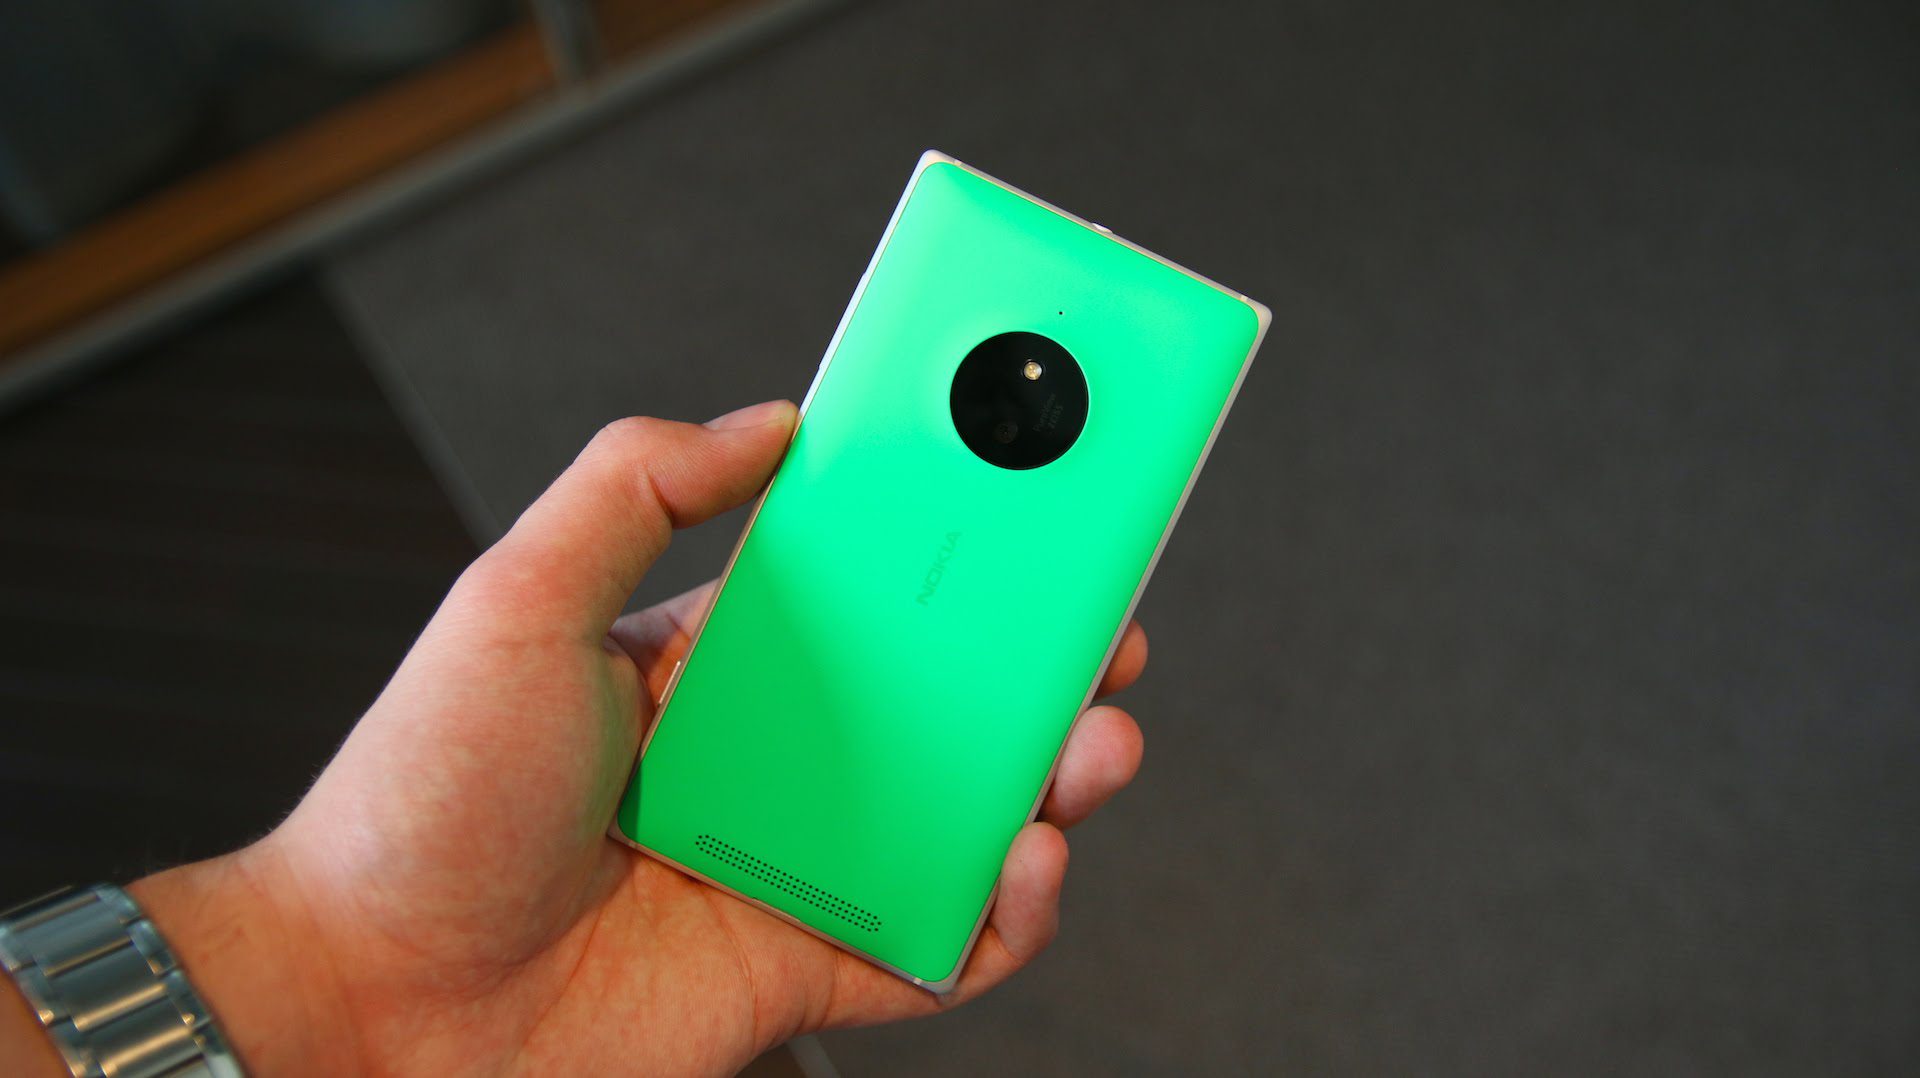 Carphone Warehouse now accepting pre-orders for the Nokia Lumia 830